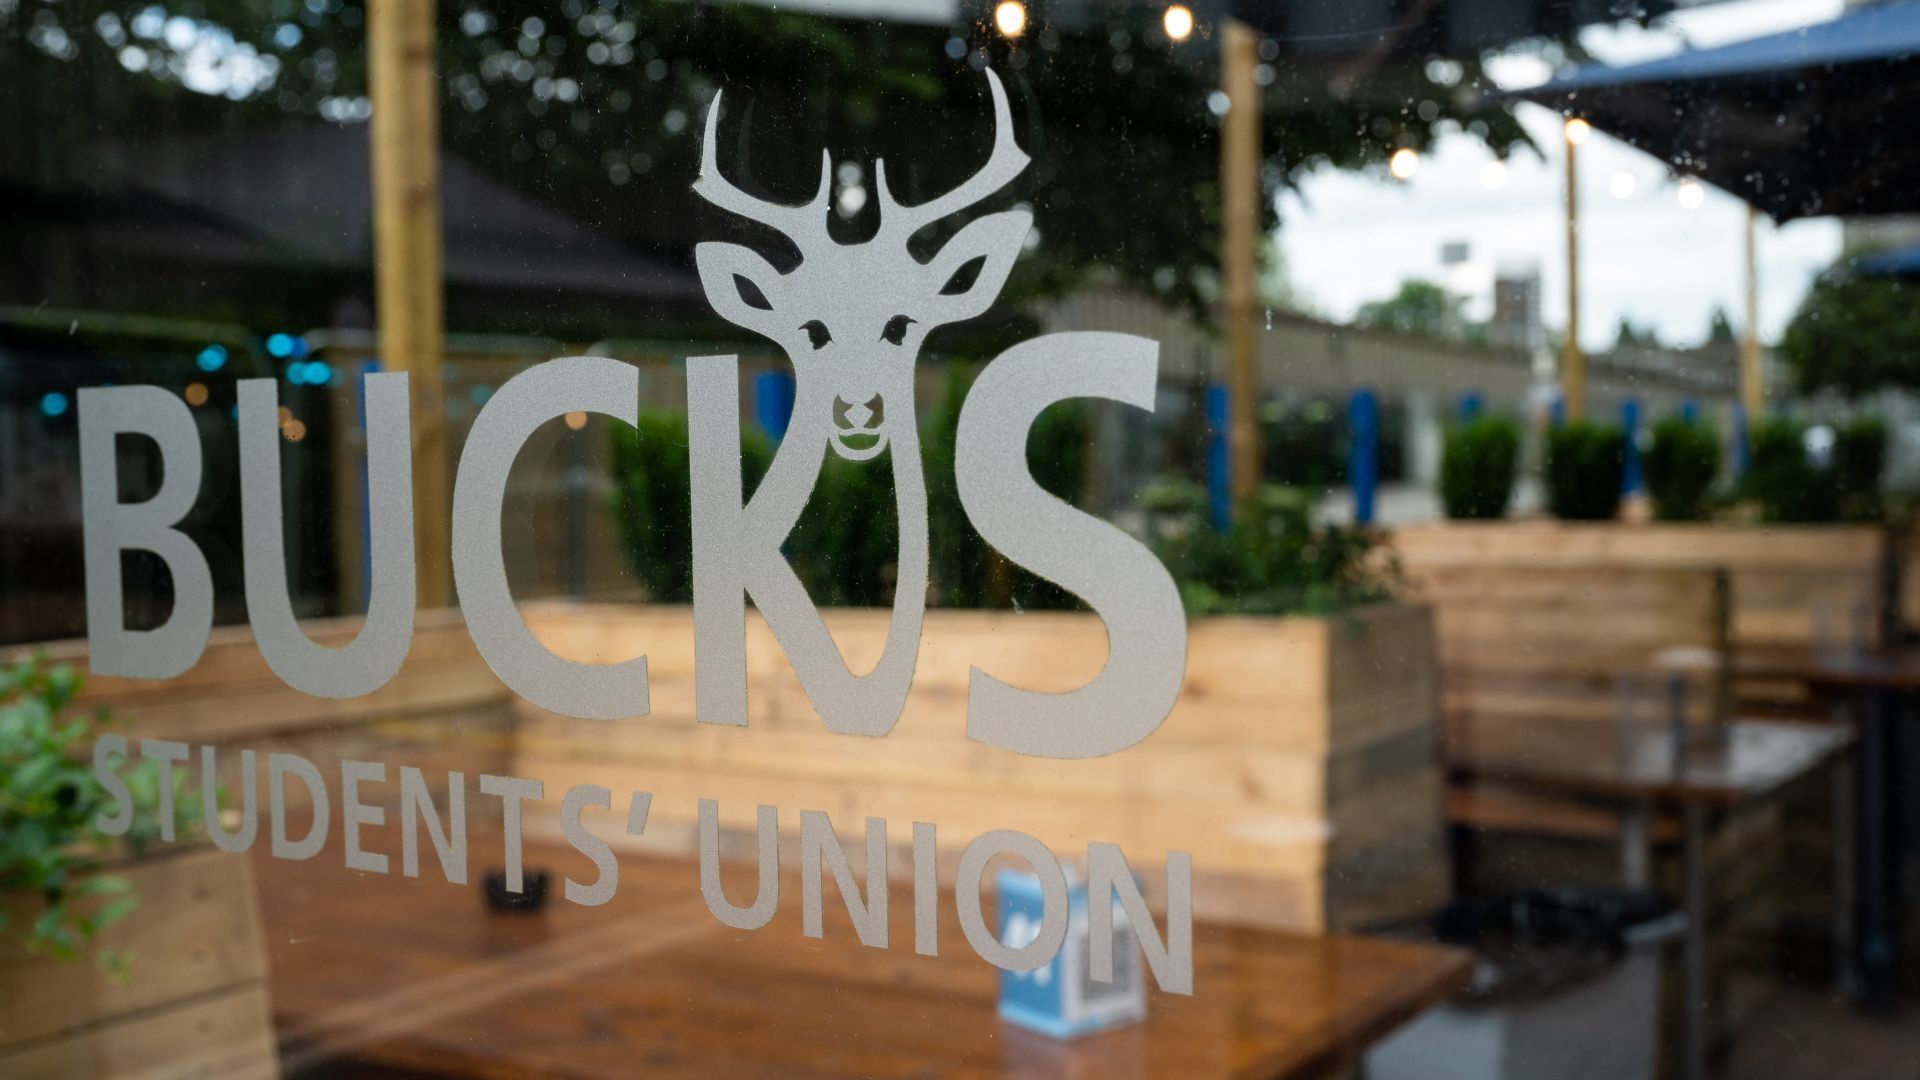 Bucks Students' Union logo on a pane of glass which has an outdoor wooden seating area behind it